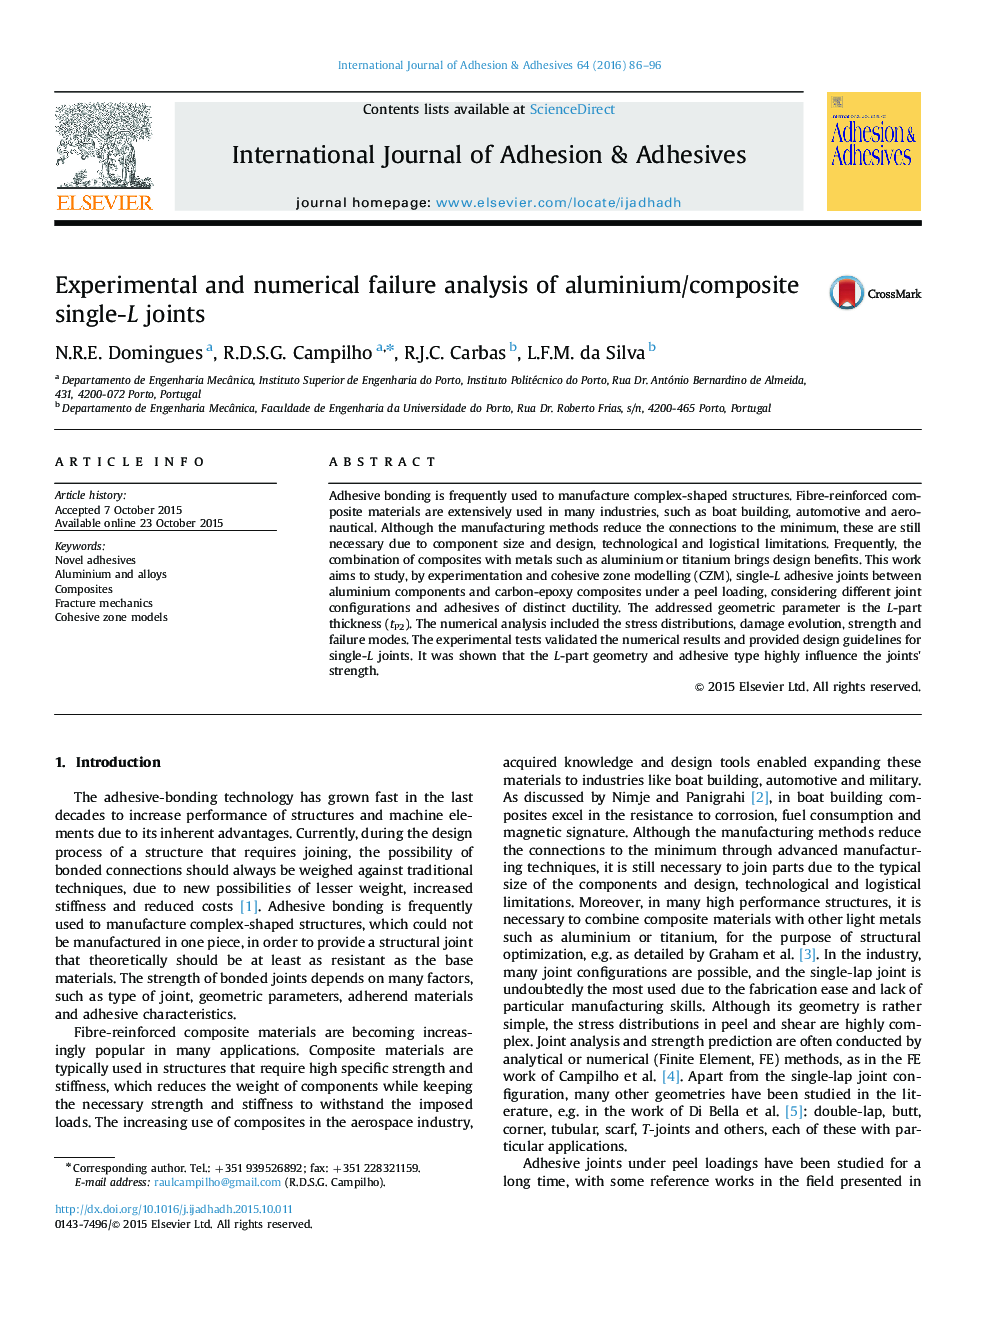 Experimental and numerical failure analysis of aluminium/composite single-L joints